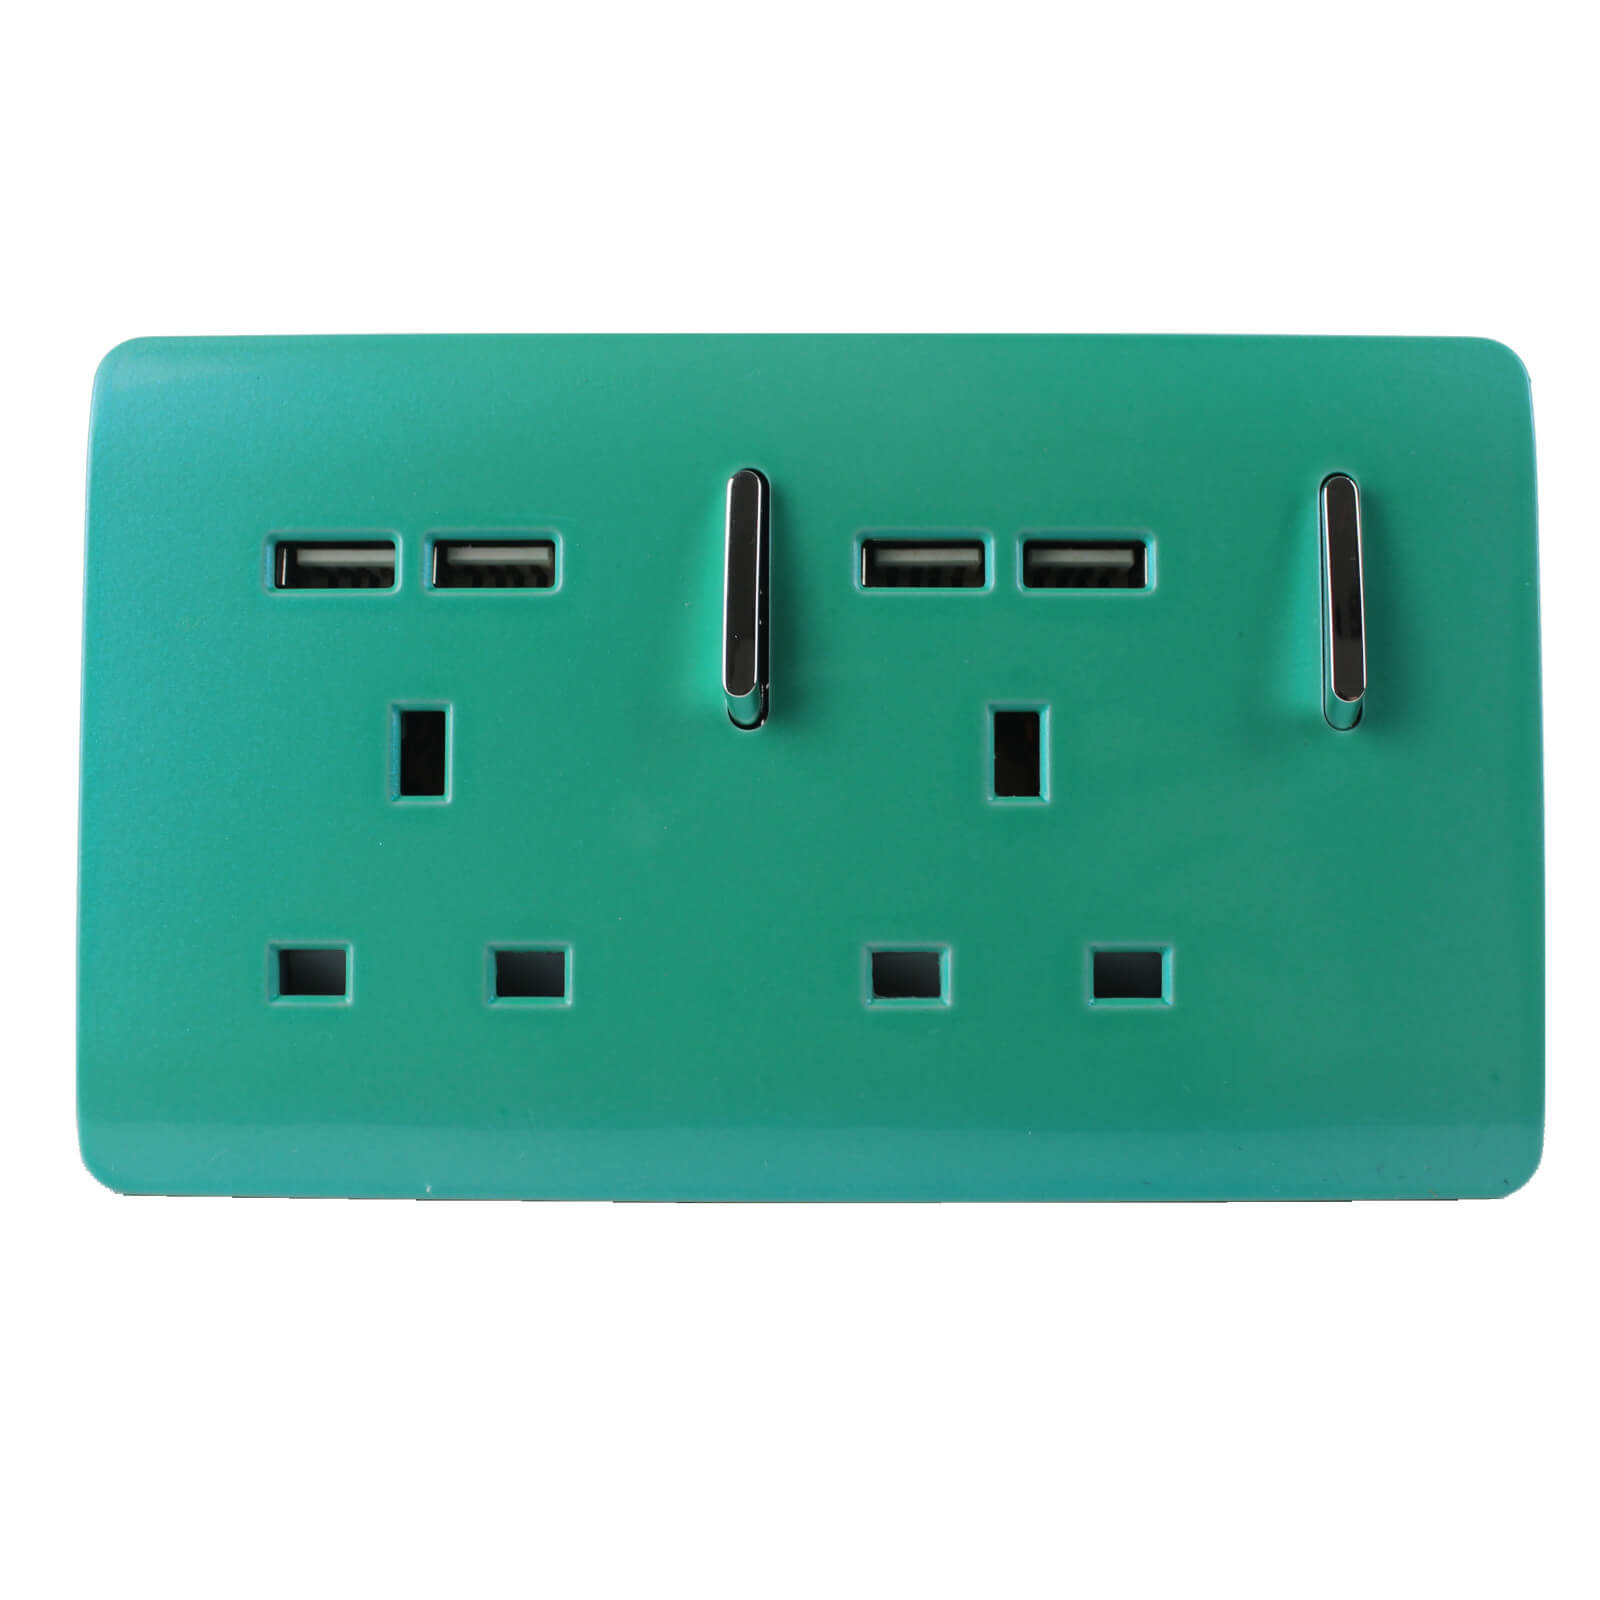 Trendi Switch 2 Gang 13A Short Switched Plug USB Socket in Screwless Teal